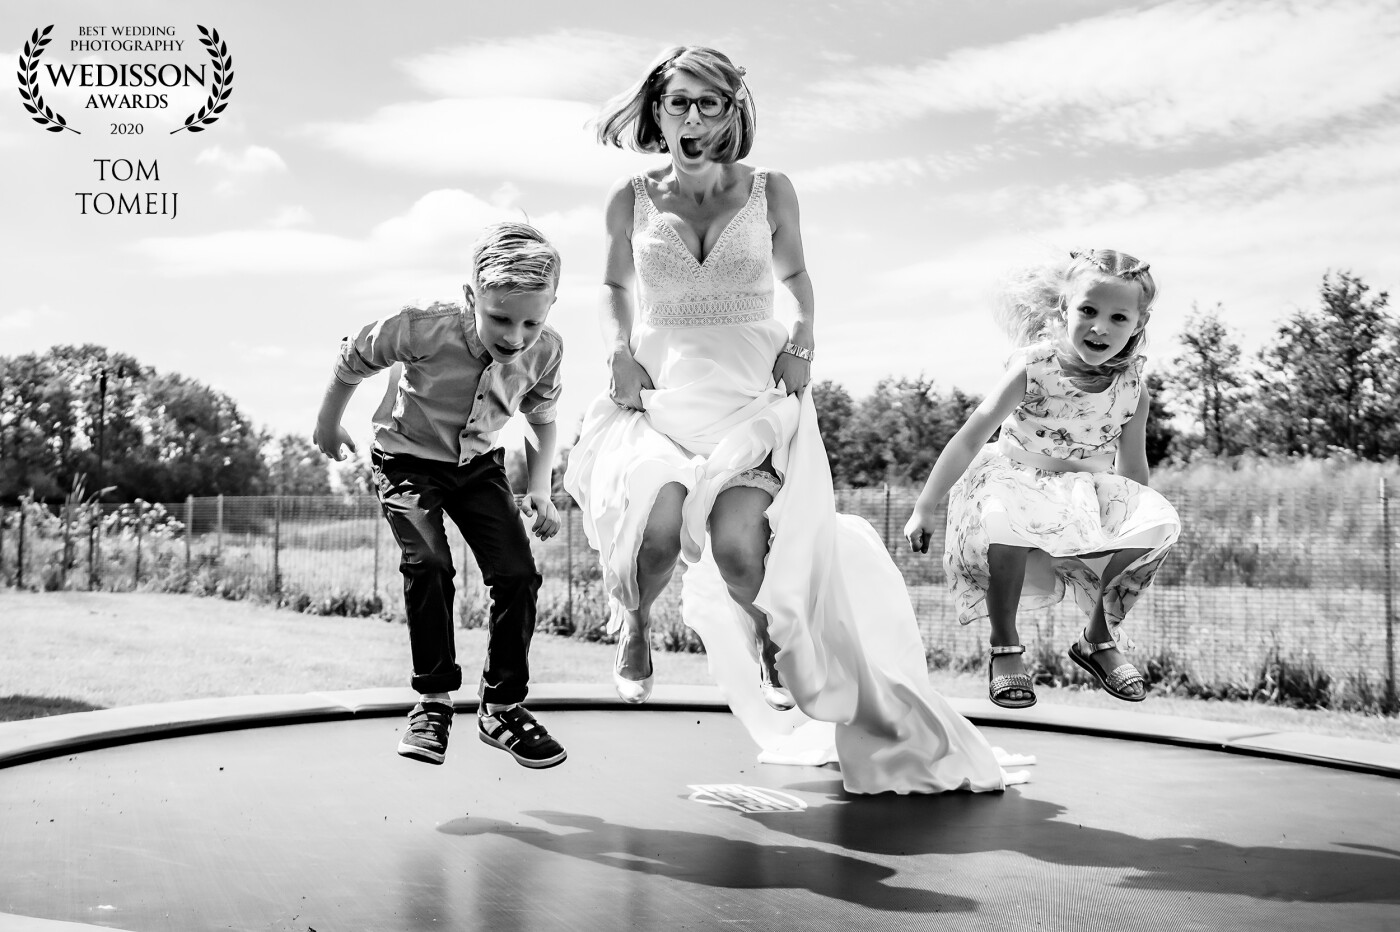 A trampoline brings back the youth in us...The bride in her parent's backyard could not resist doing a jump with her cousin and niece. Fun is a key ingredient for a good wedding/photo. <br />
